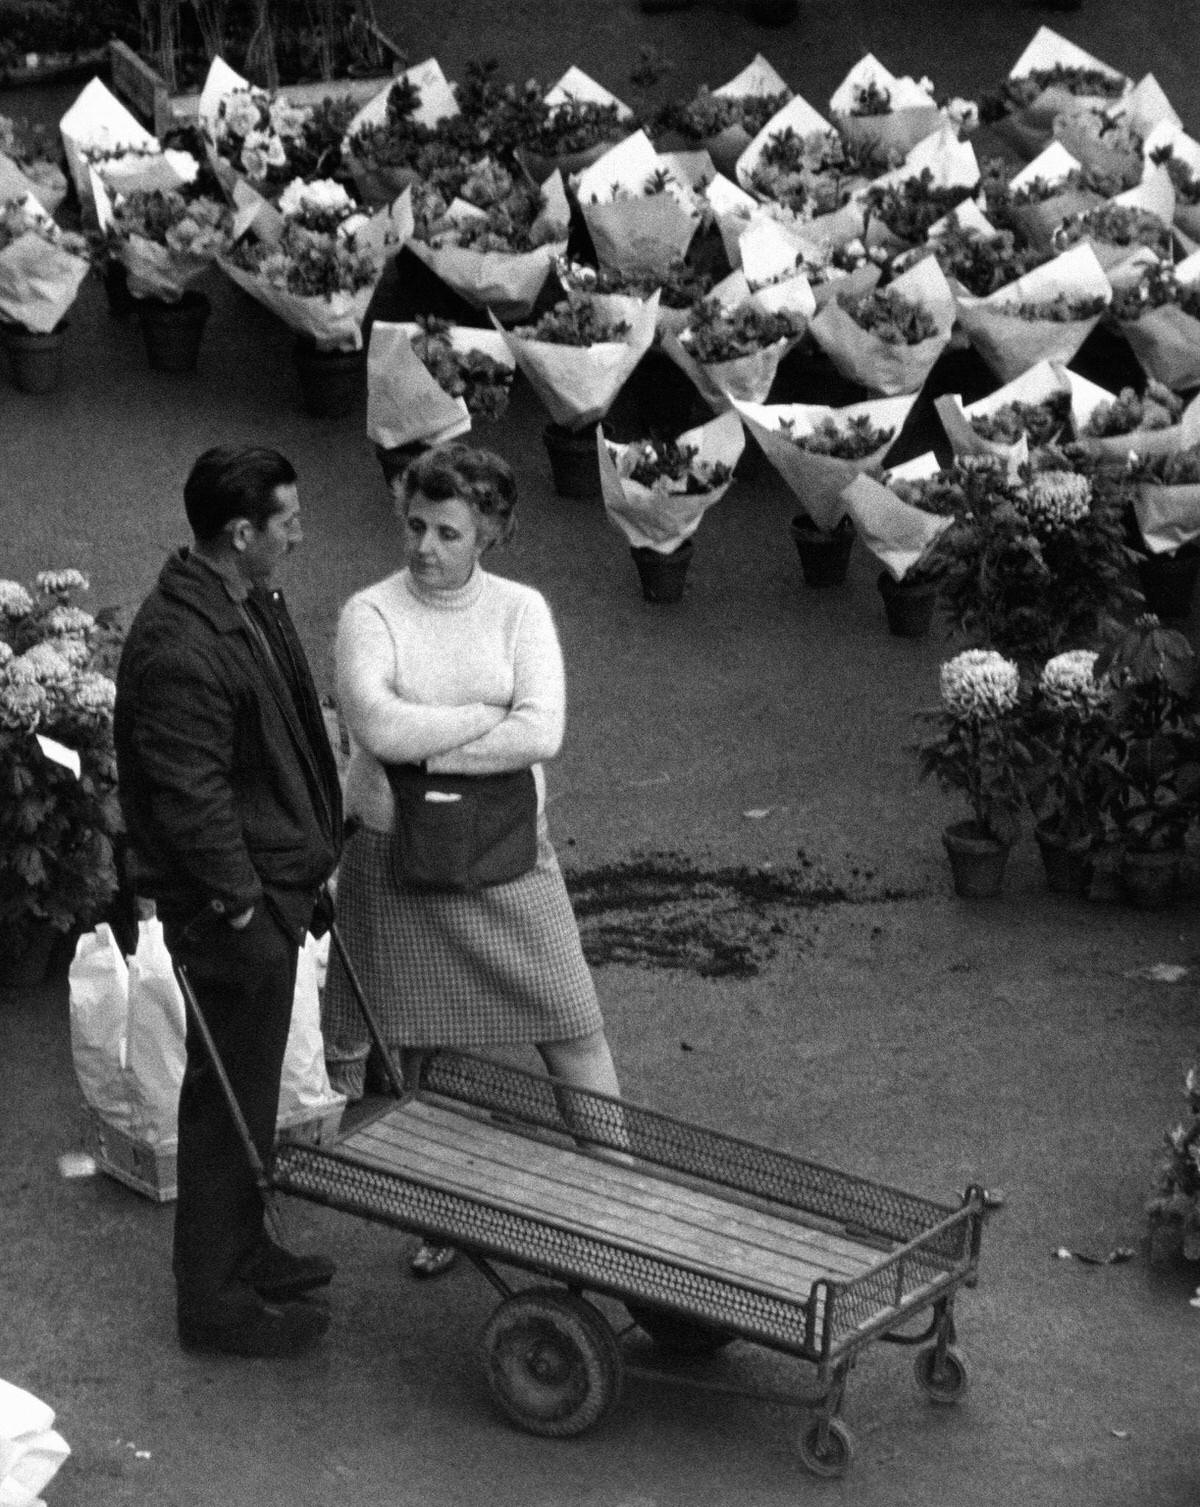 A woman and a man speaking surrounded by bunches of flowers in Les Halles, 1967